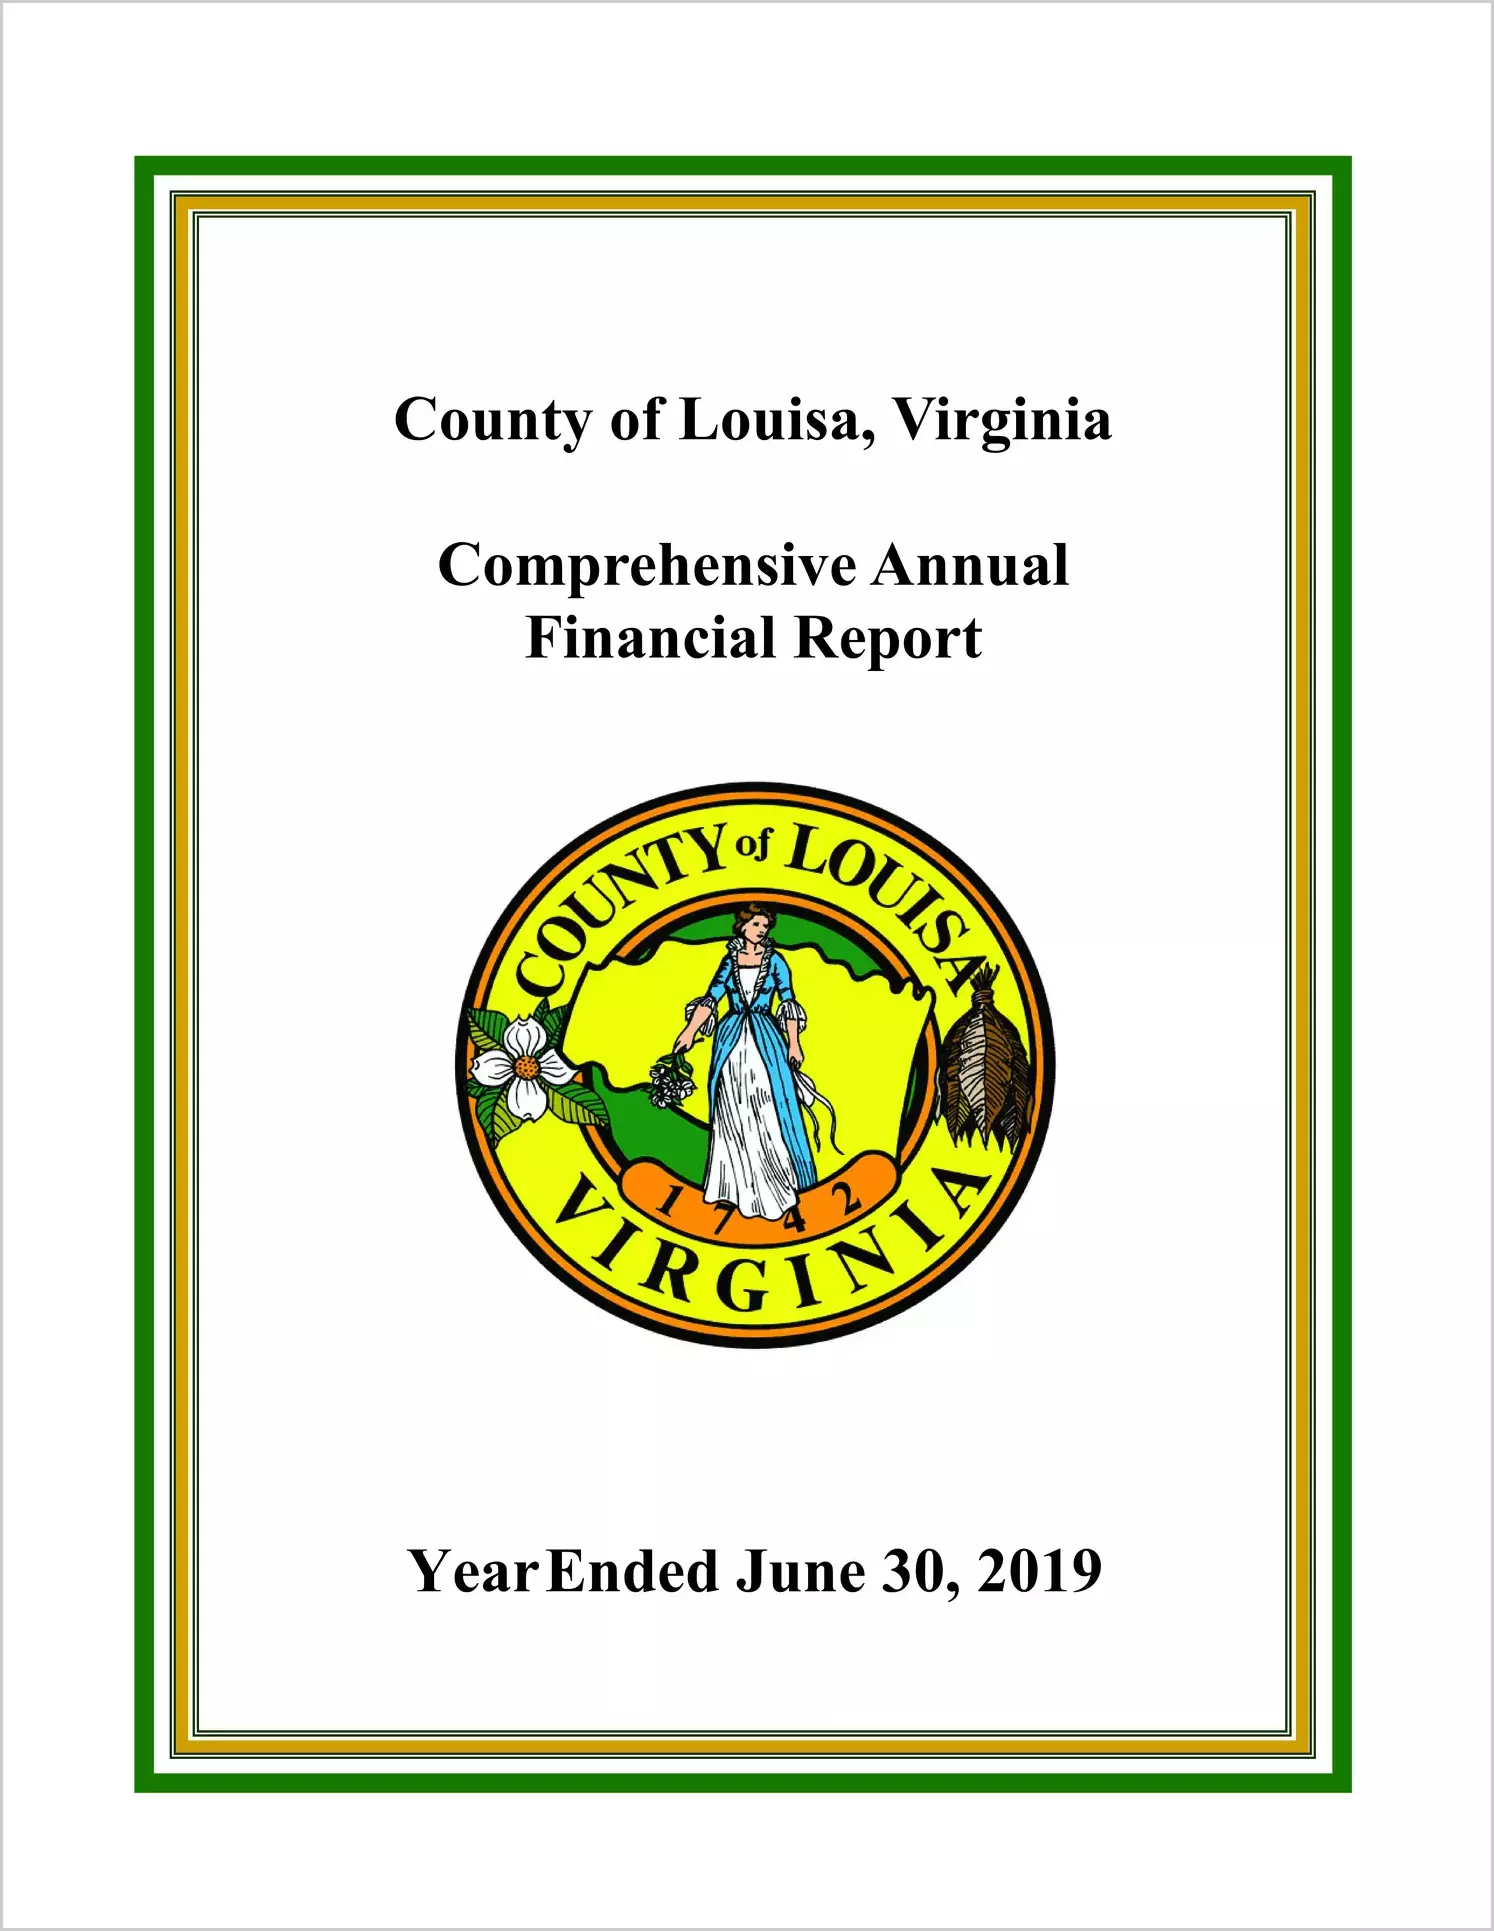 2019 Annual Financial Report for County of Louisa